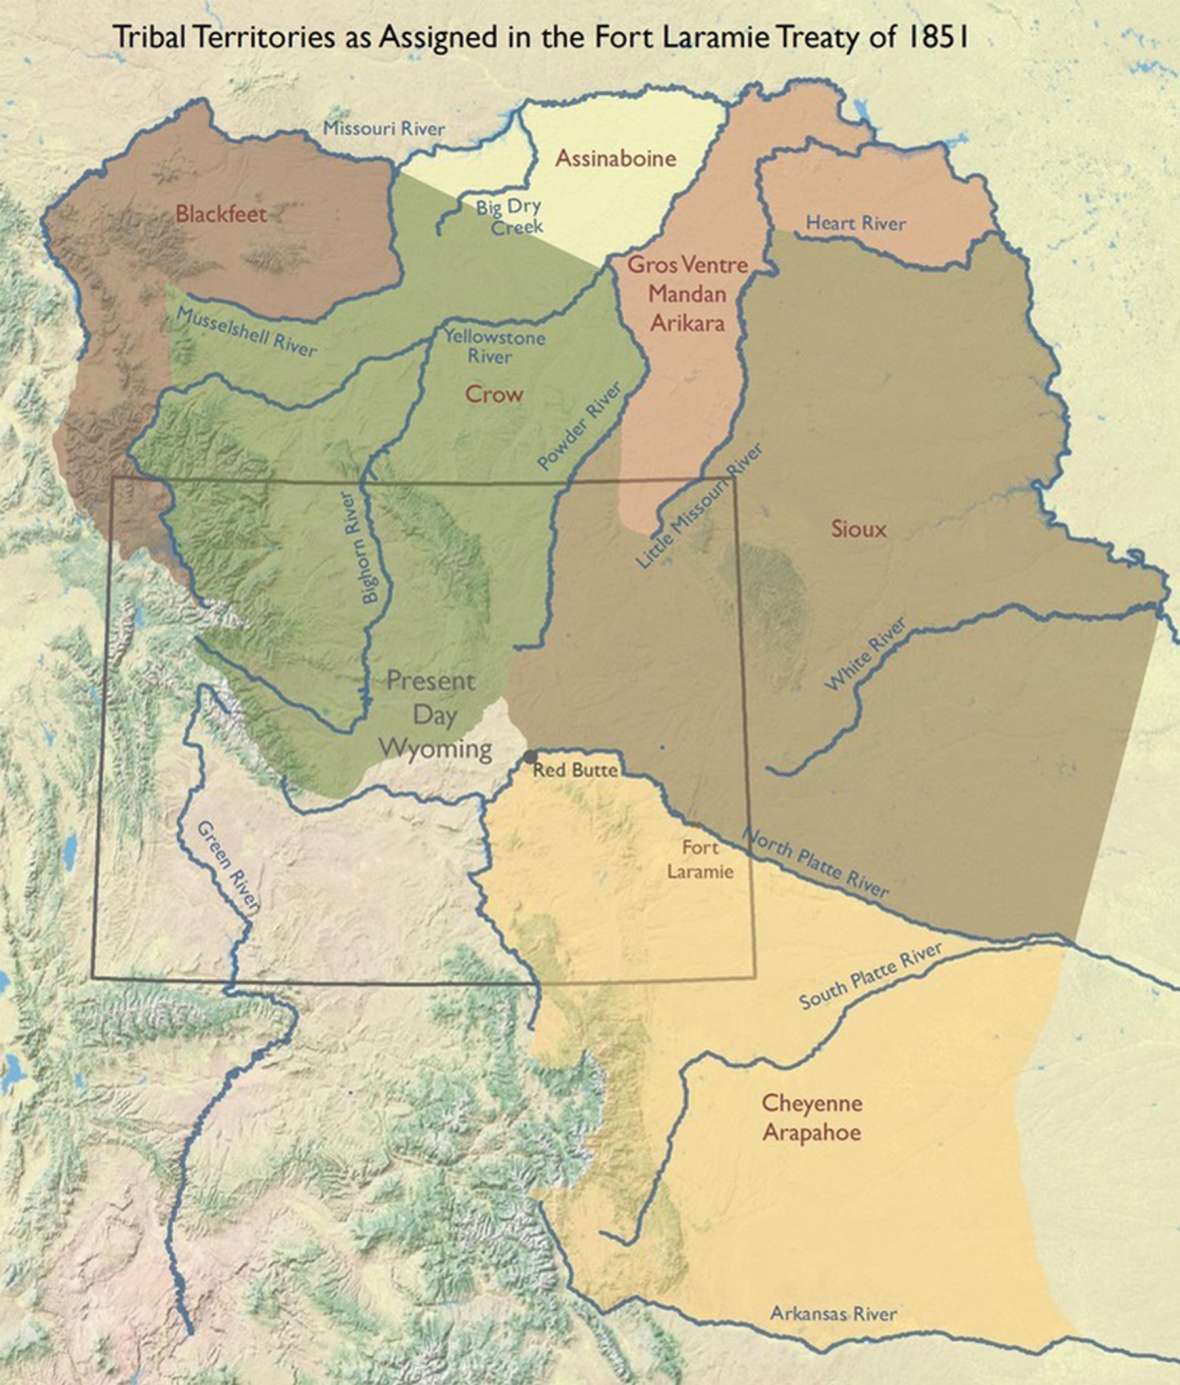 The 1851 Fort Laramie Treaty was the first to assign separate lands to the tribes of the Northern Plains. Map by WyGISC, University of Wyoming.